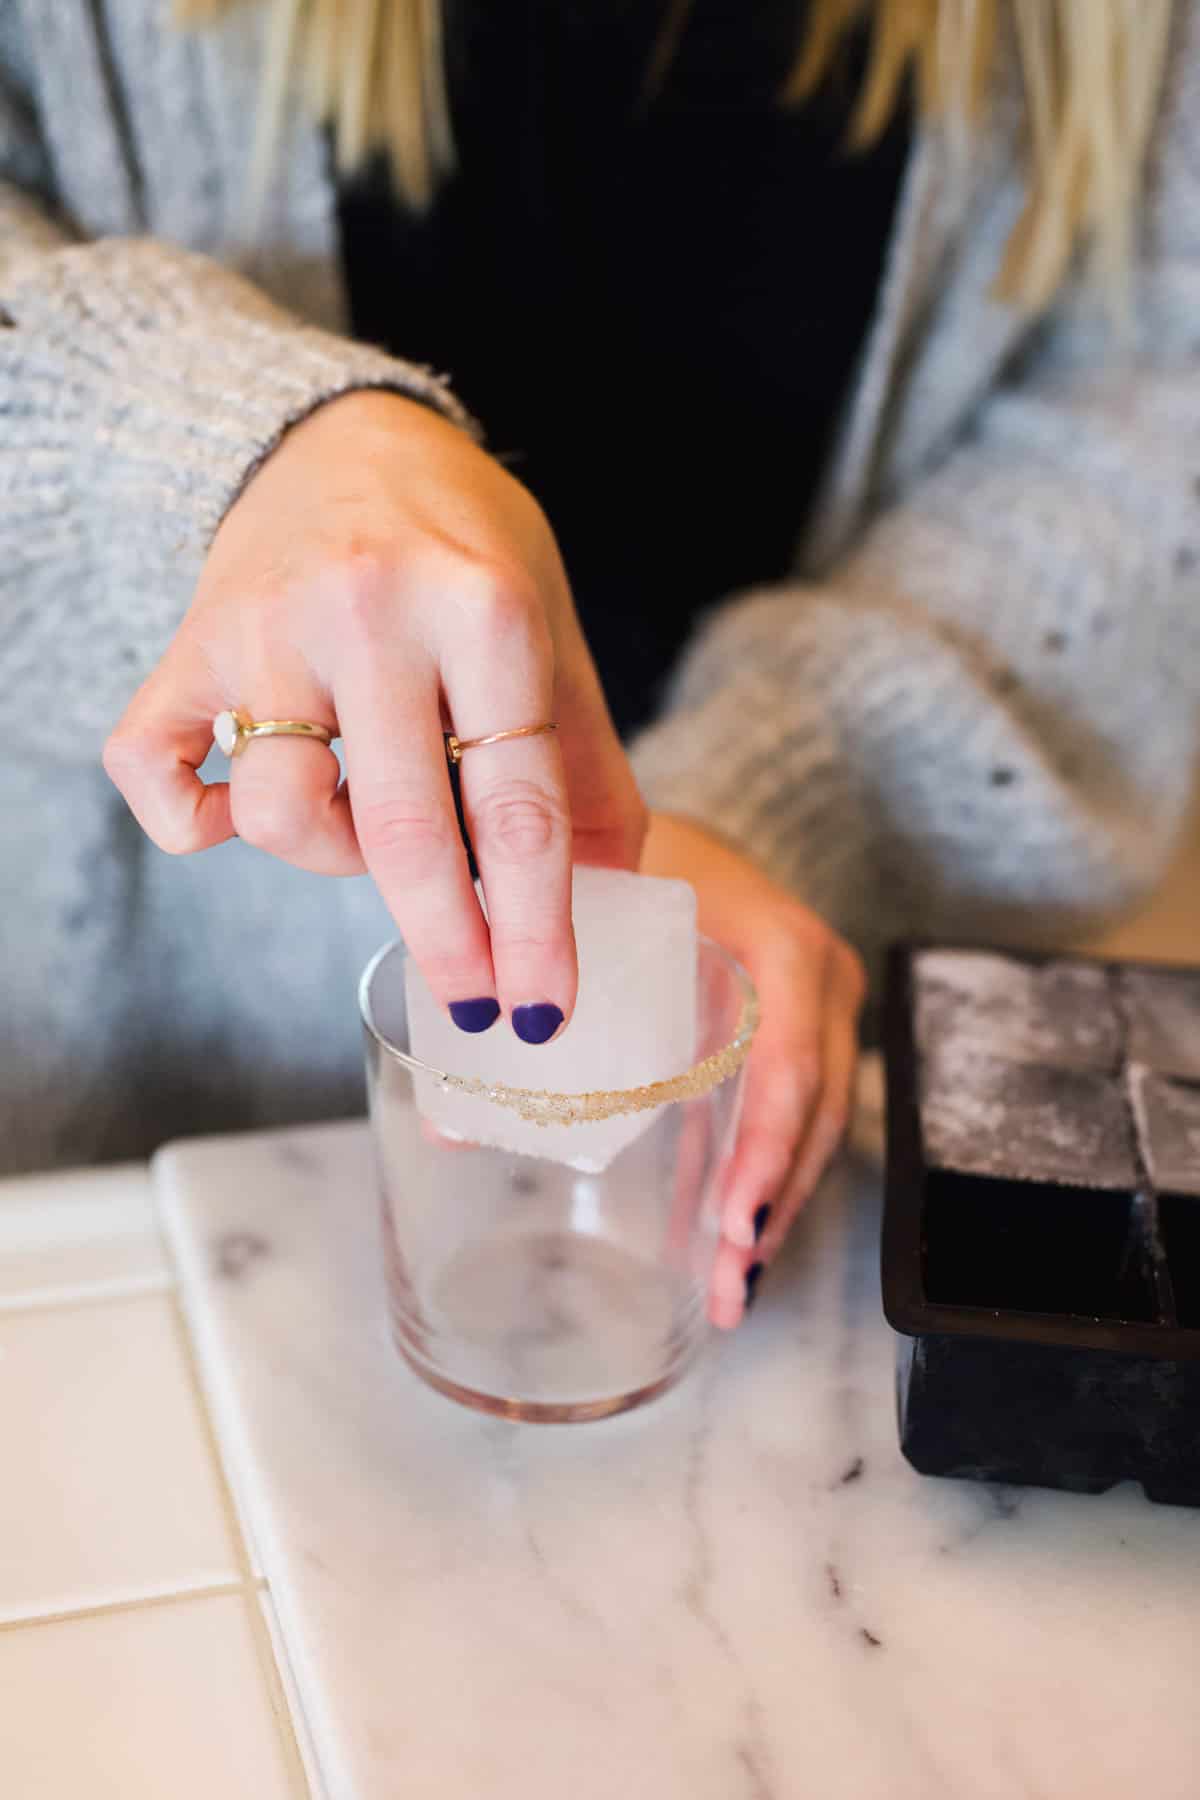 Woman adding a large square ice cube to a cocktail glass.